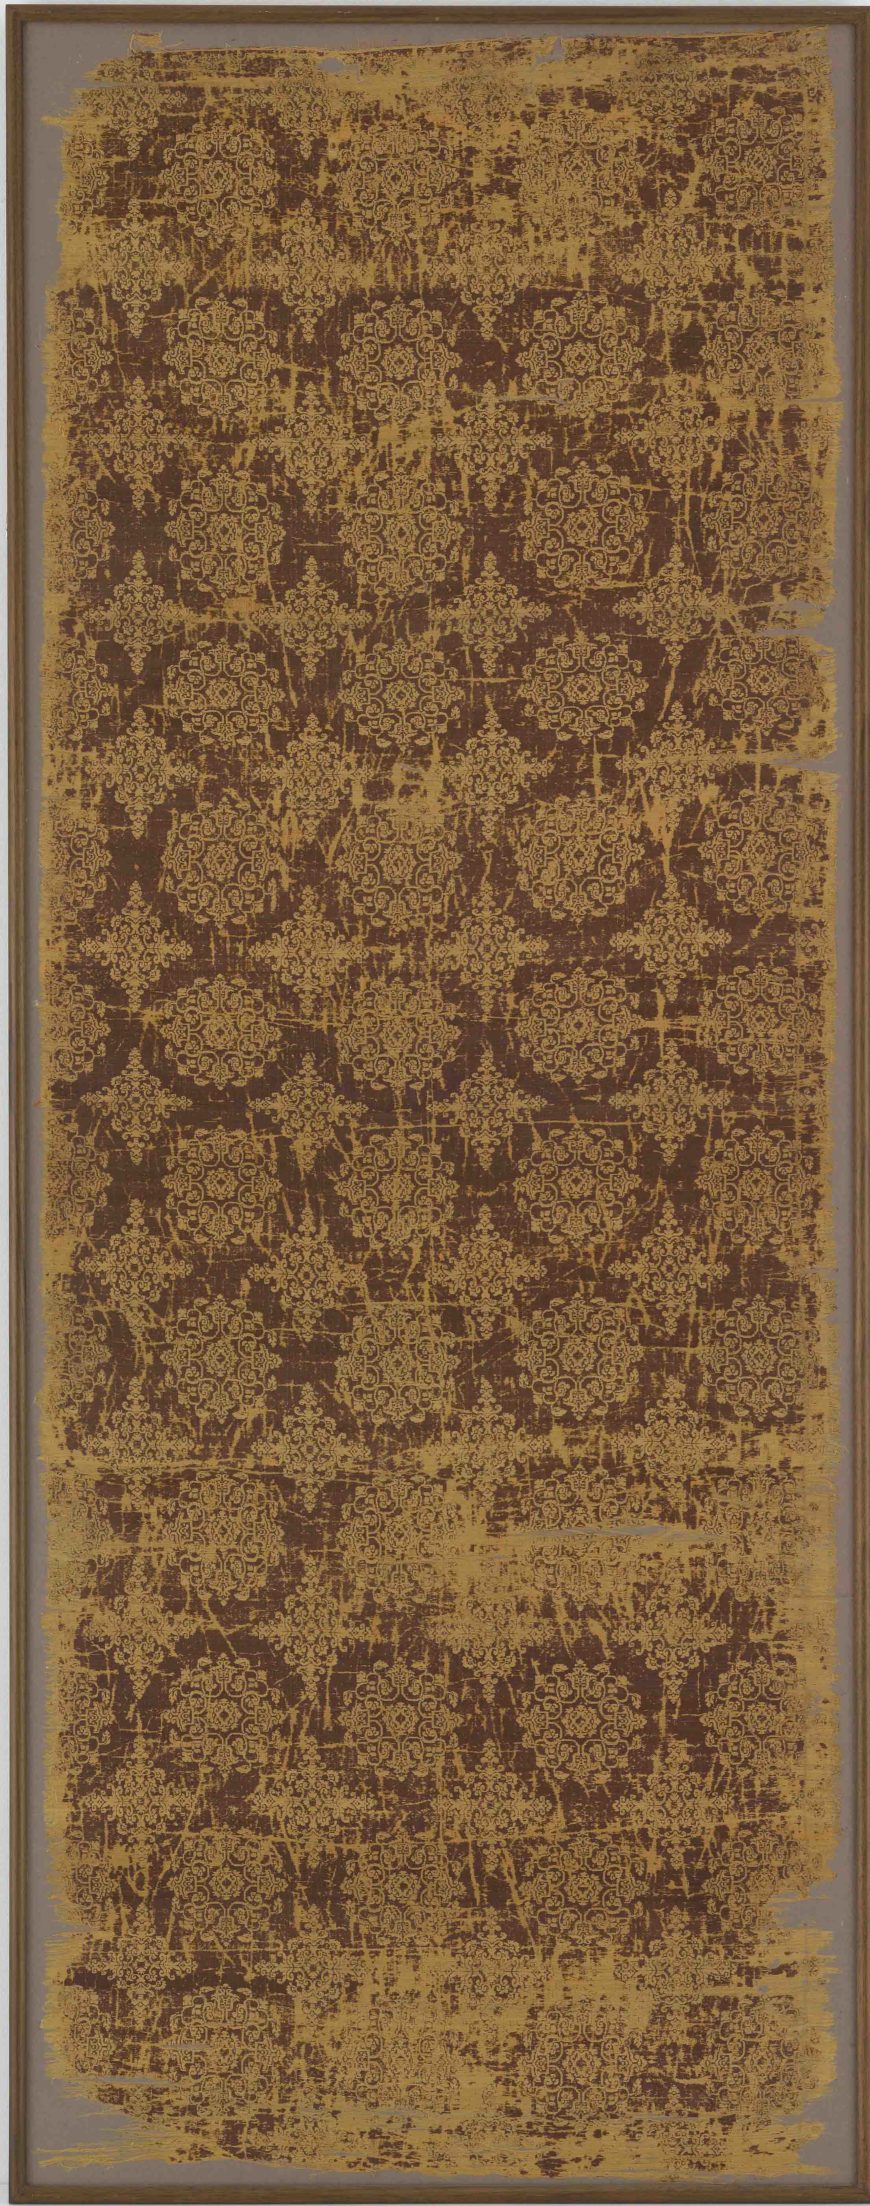 Textile with floral medallions and lozenges, mid-Tang dynasty, first half of the 8th century, brocade (jin): woven silk (weft-faced compound twill), China, 150.1 high x 59.3 cm (Freer Gallery of Art, Smithsonian, Washington, DC: Gift of Charles Lang Freer, F1911.597a-b)